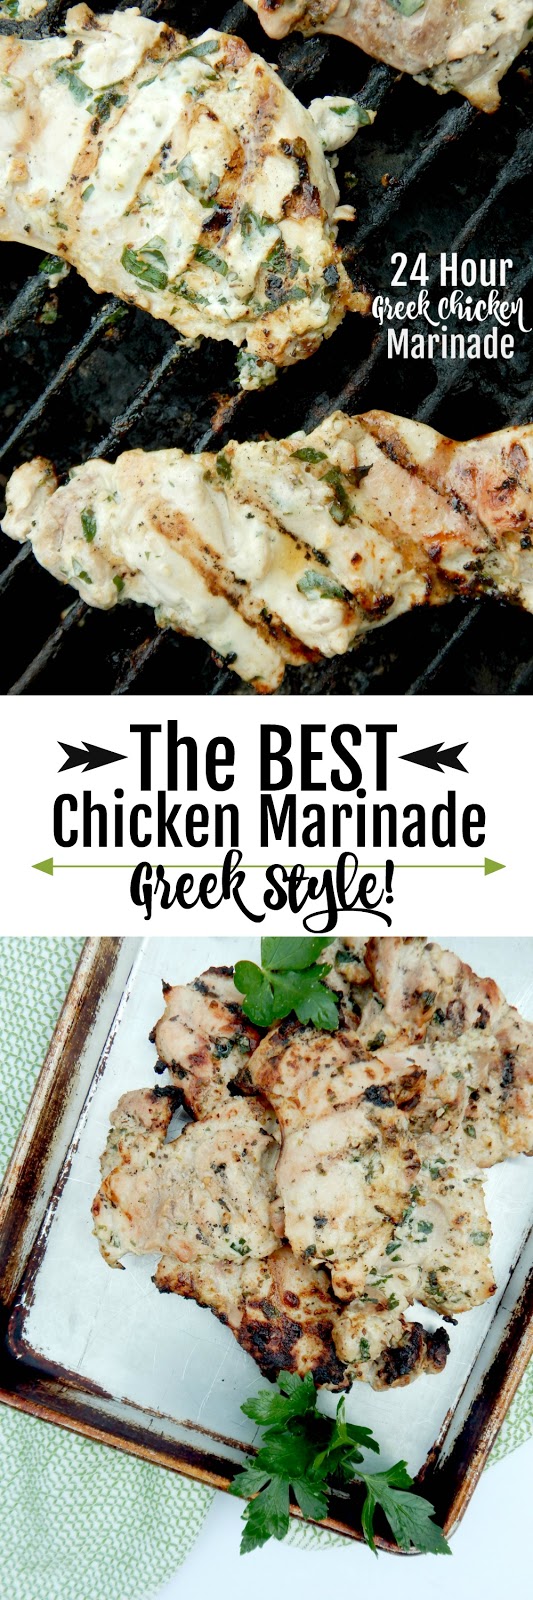 24 Hour Greek Chicken Marinade...this will be your NEW, favorite marinade!  5 minute prep and can stay marinating for up to 24 hours.  Creamy, lemony, garlicky and perfect for summer! (sweetandsavoryfood.com)